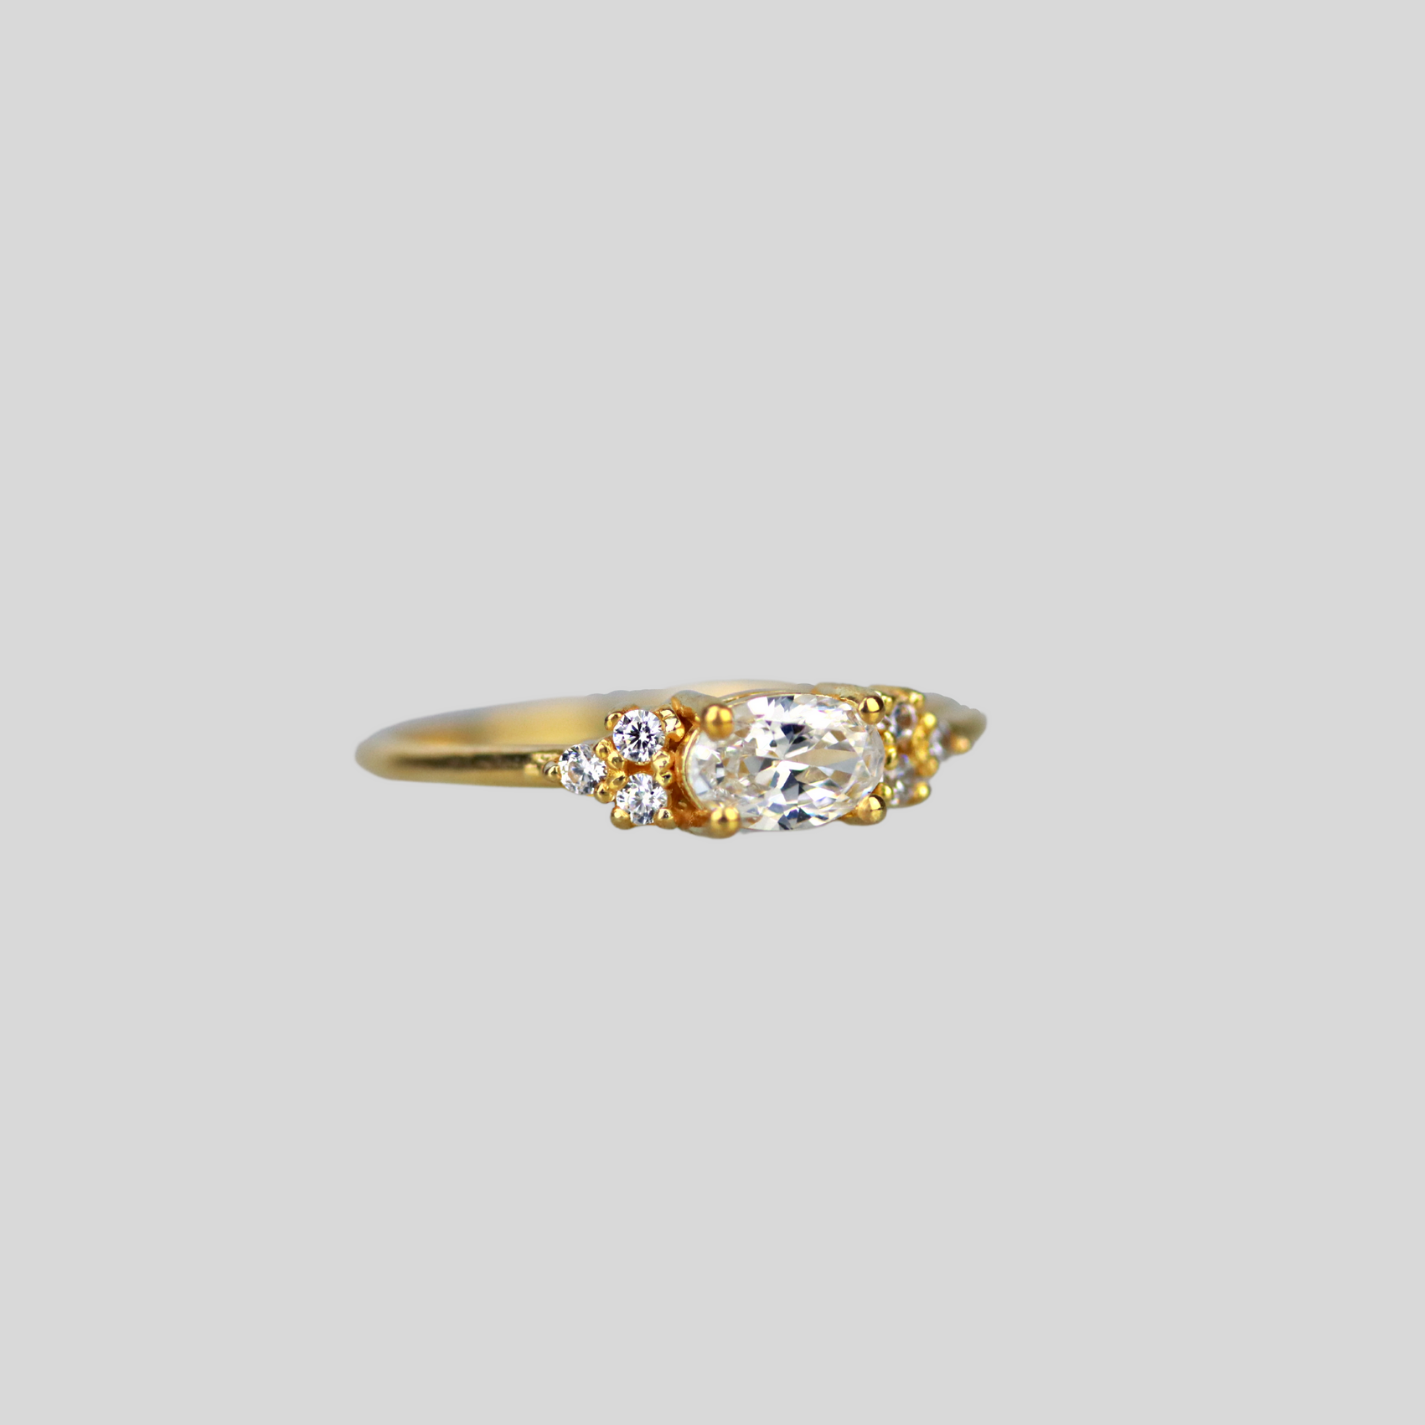 Solid 14k gold east-west oval cz ring